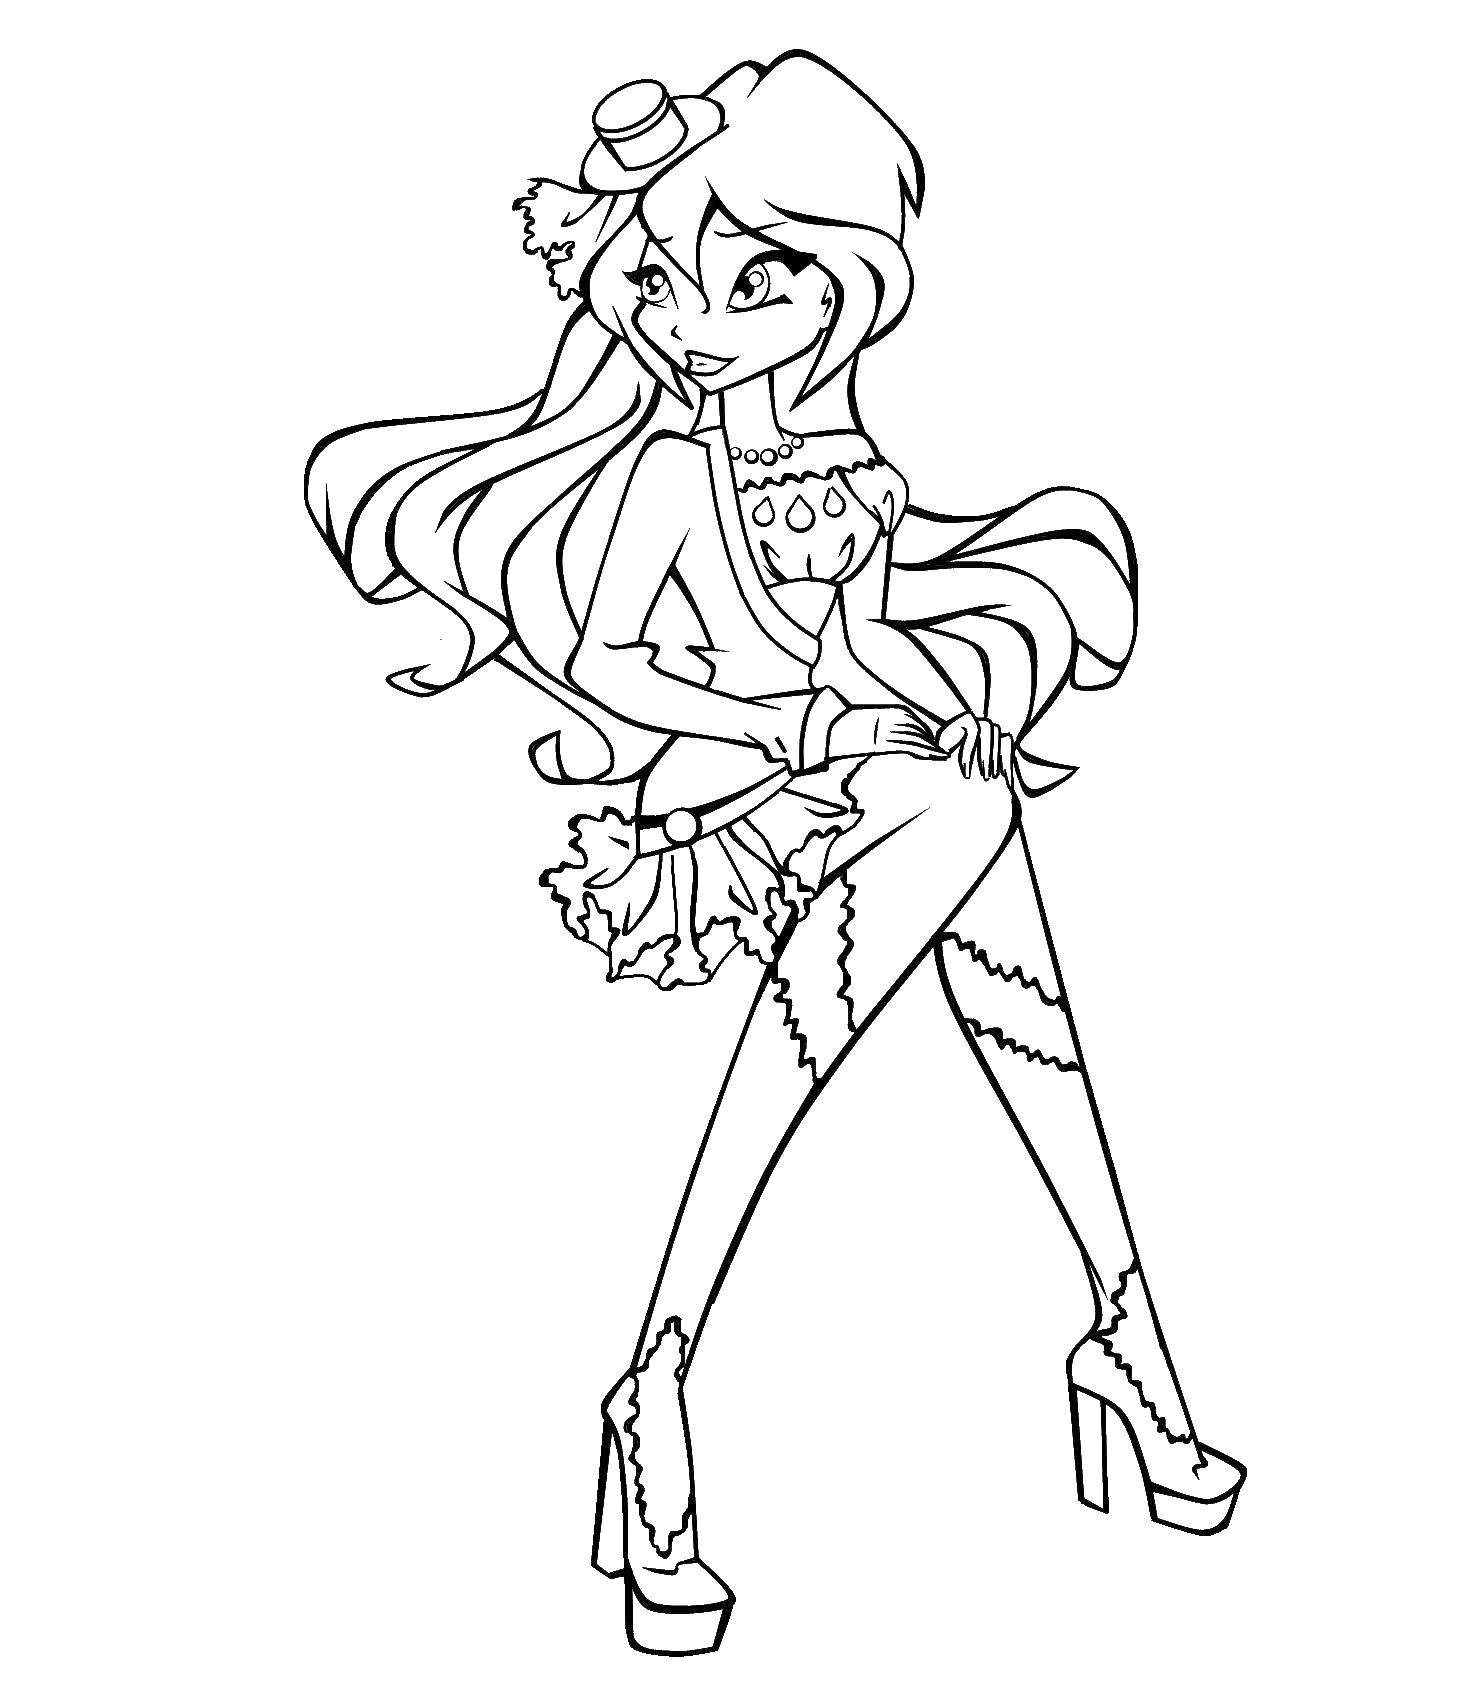 Coloring Character from the cartoon winx. Category Cartoon character. Tags:  Character cartoon, Winx.